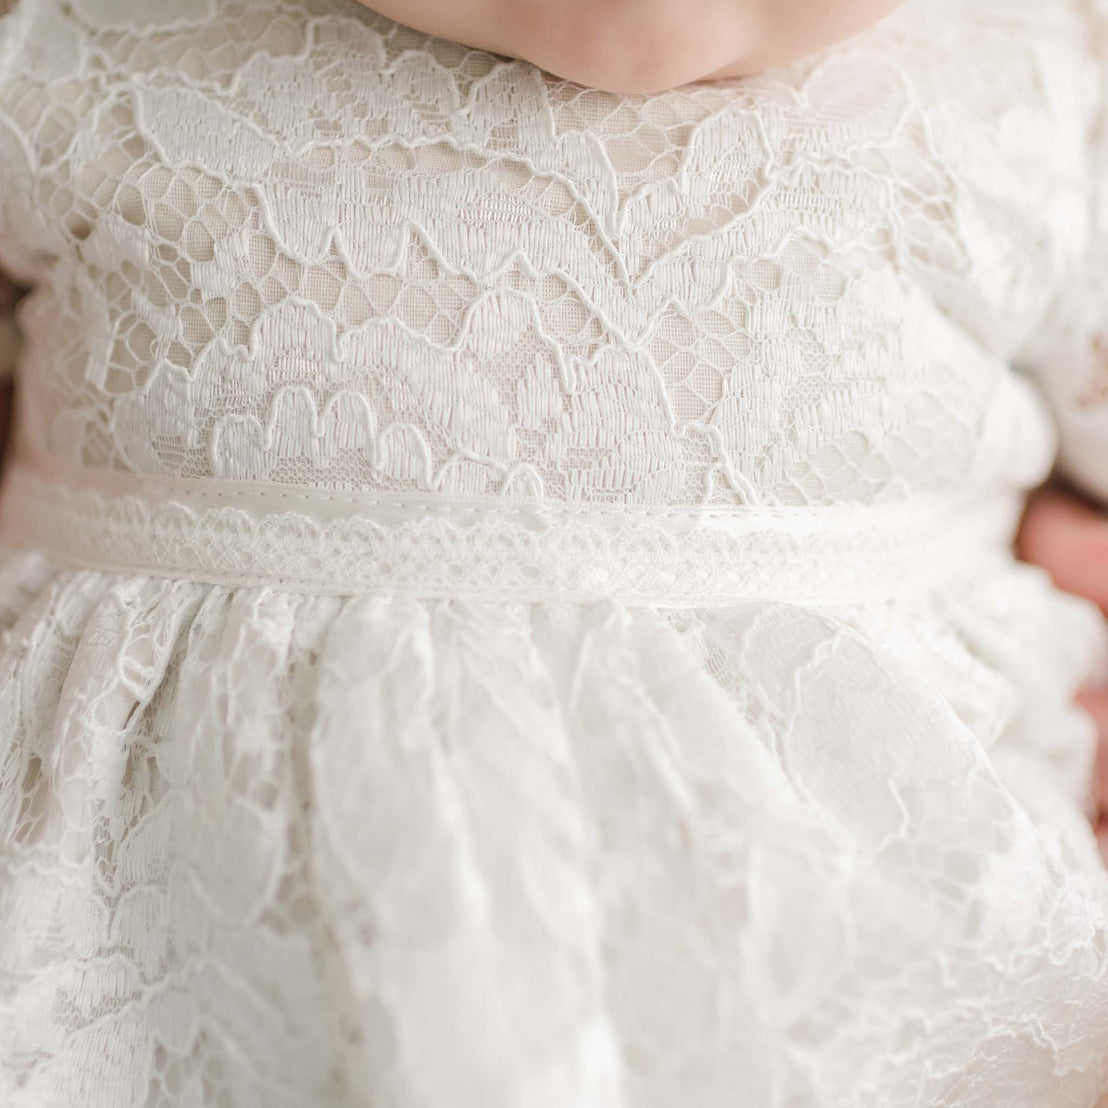 Close-up of a baby wearing a Rose Romper Dress, focusing on the detailed fabric and design around the waistline and bodice.